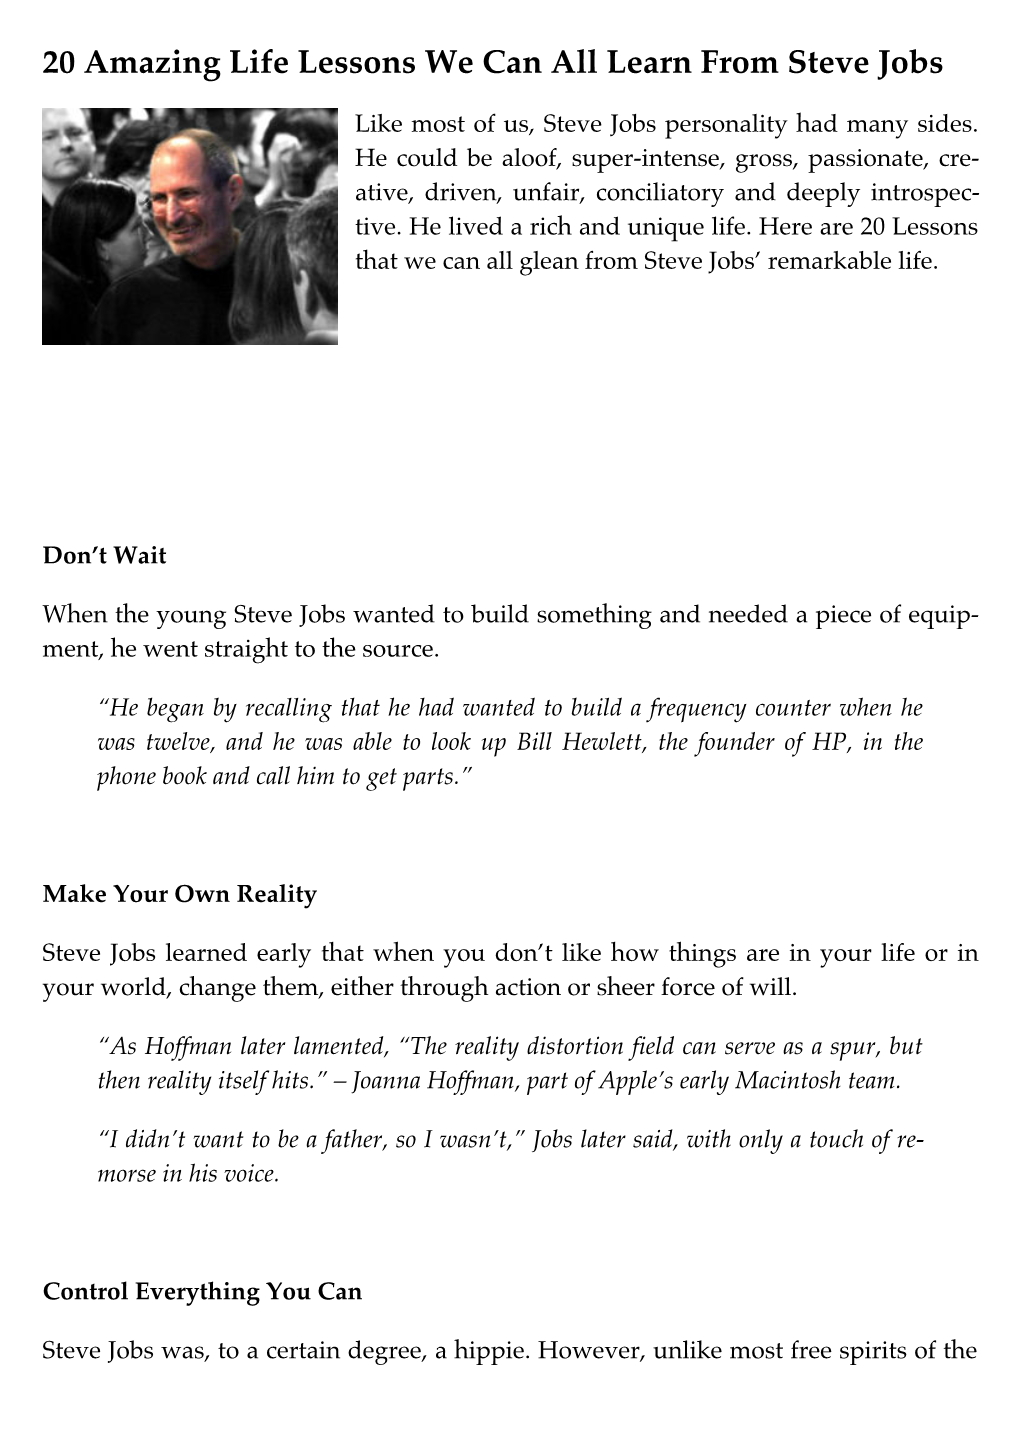 20 Amazing Life Lessons We Can All Learn from Steve Jobs